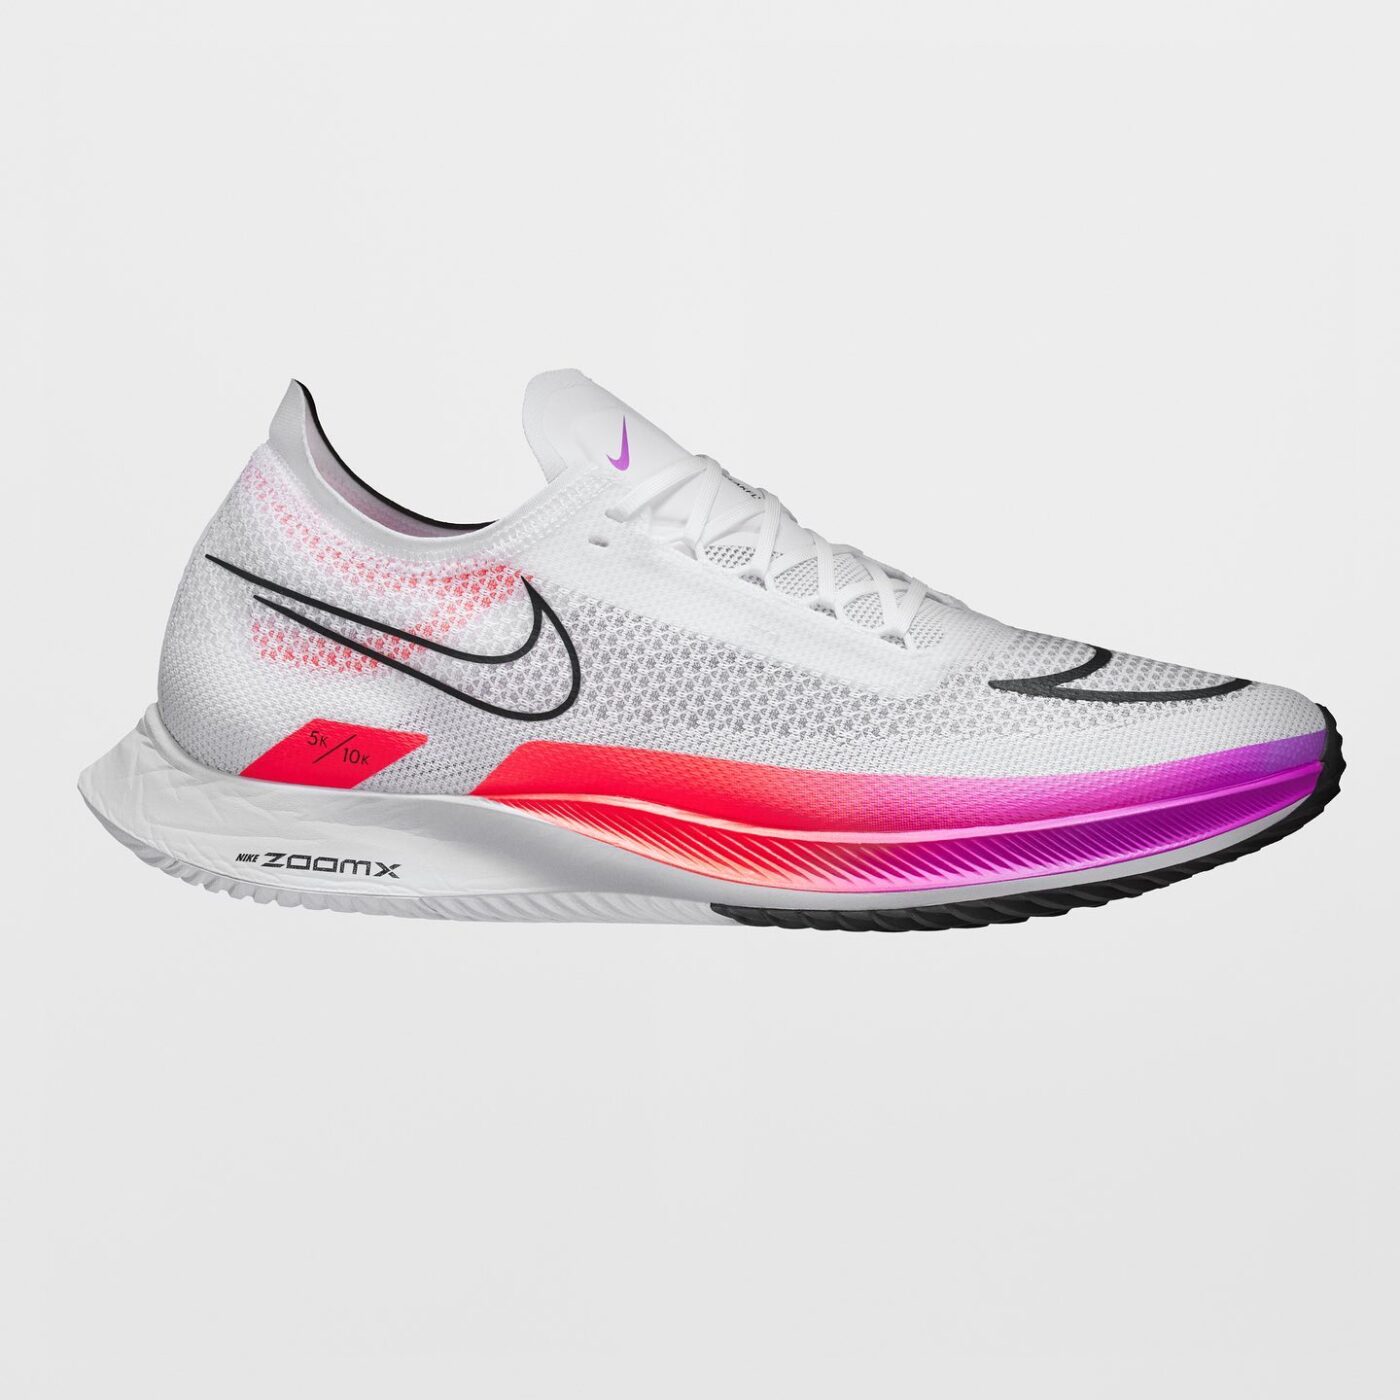 nike zoomx streakfly fast pack